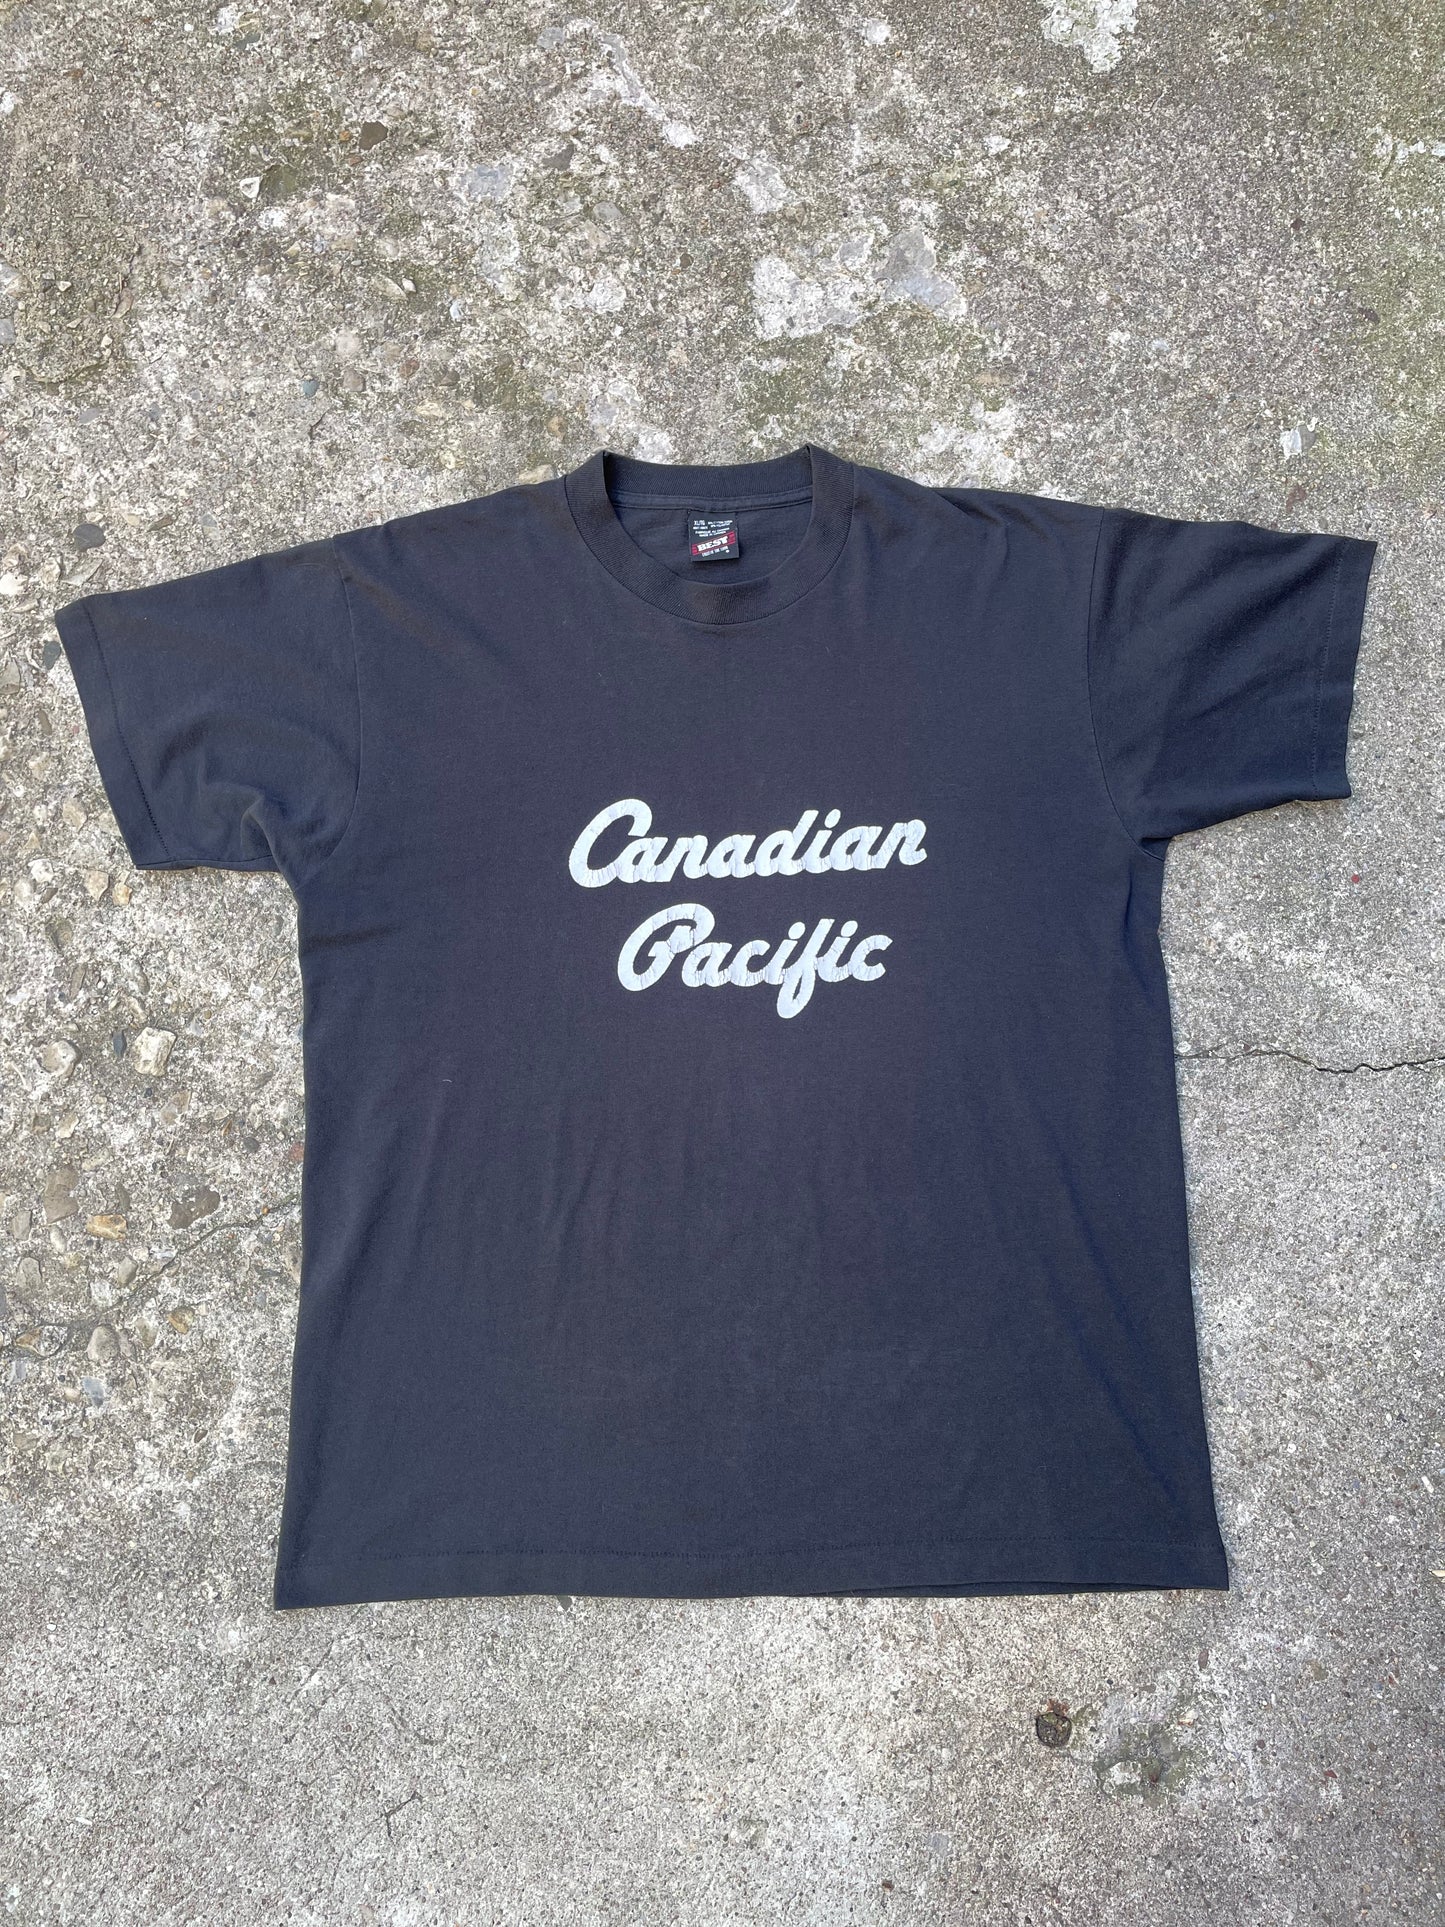 1990's Canadian Pacific Railway Graphic T-Shirt - XL